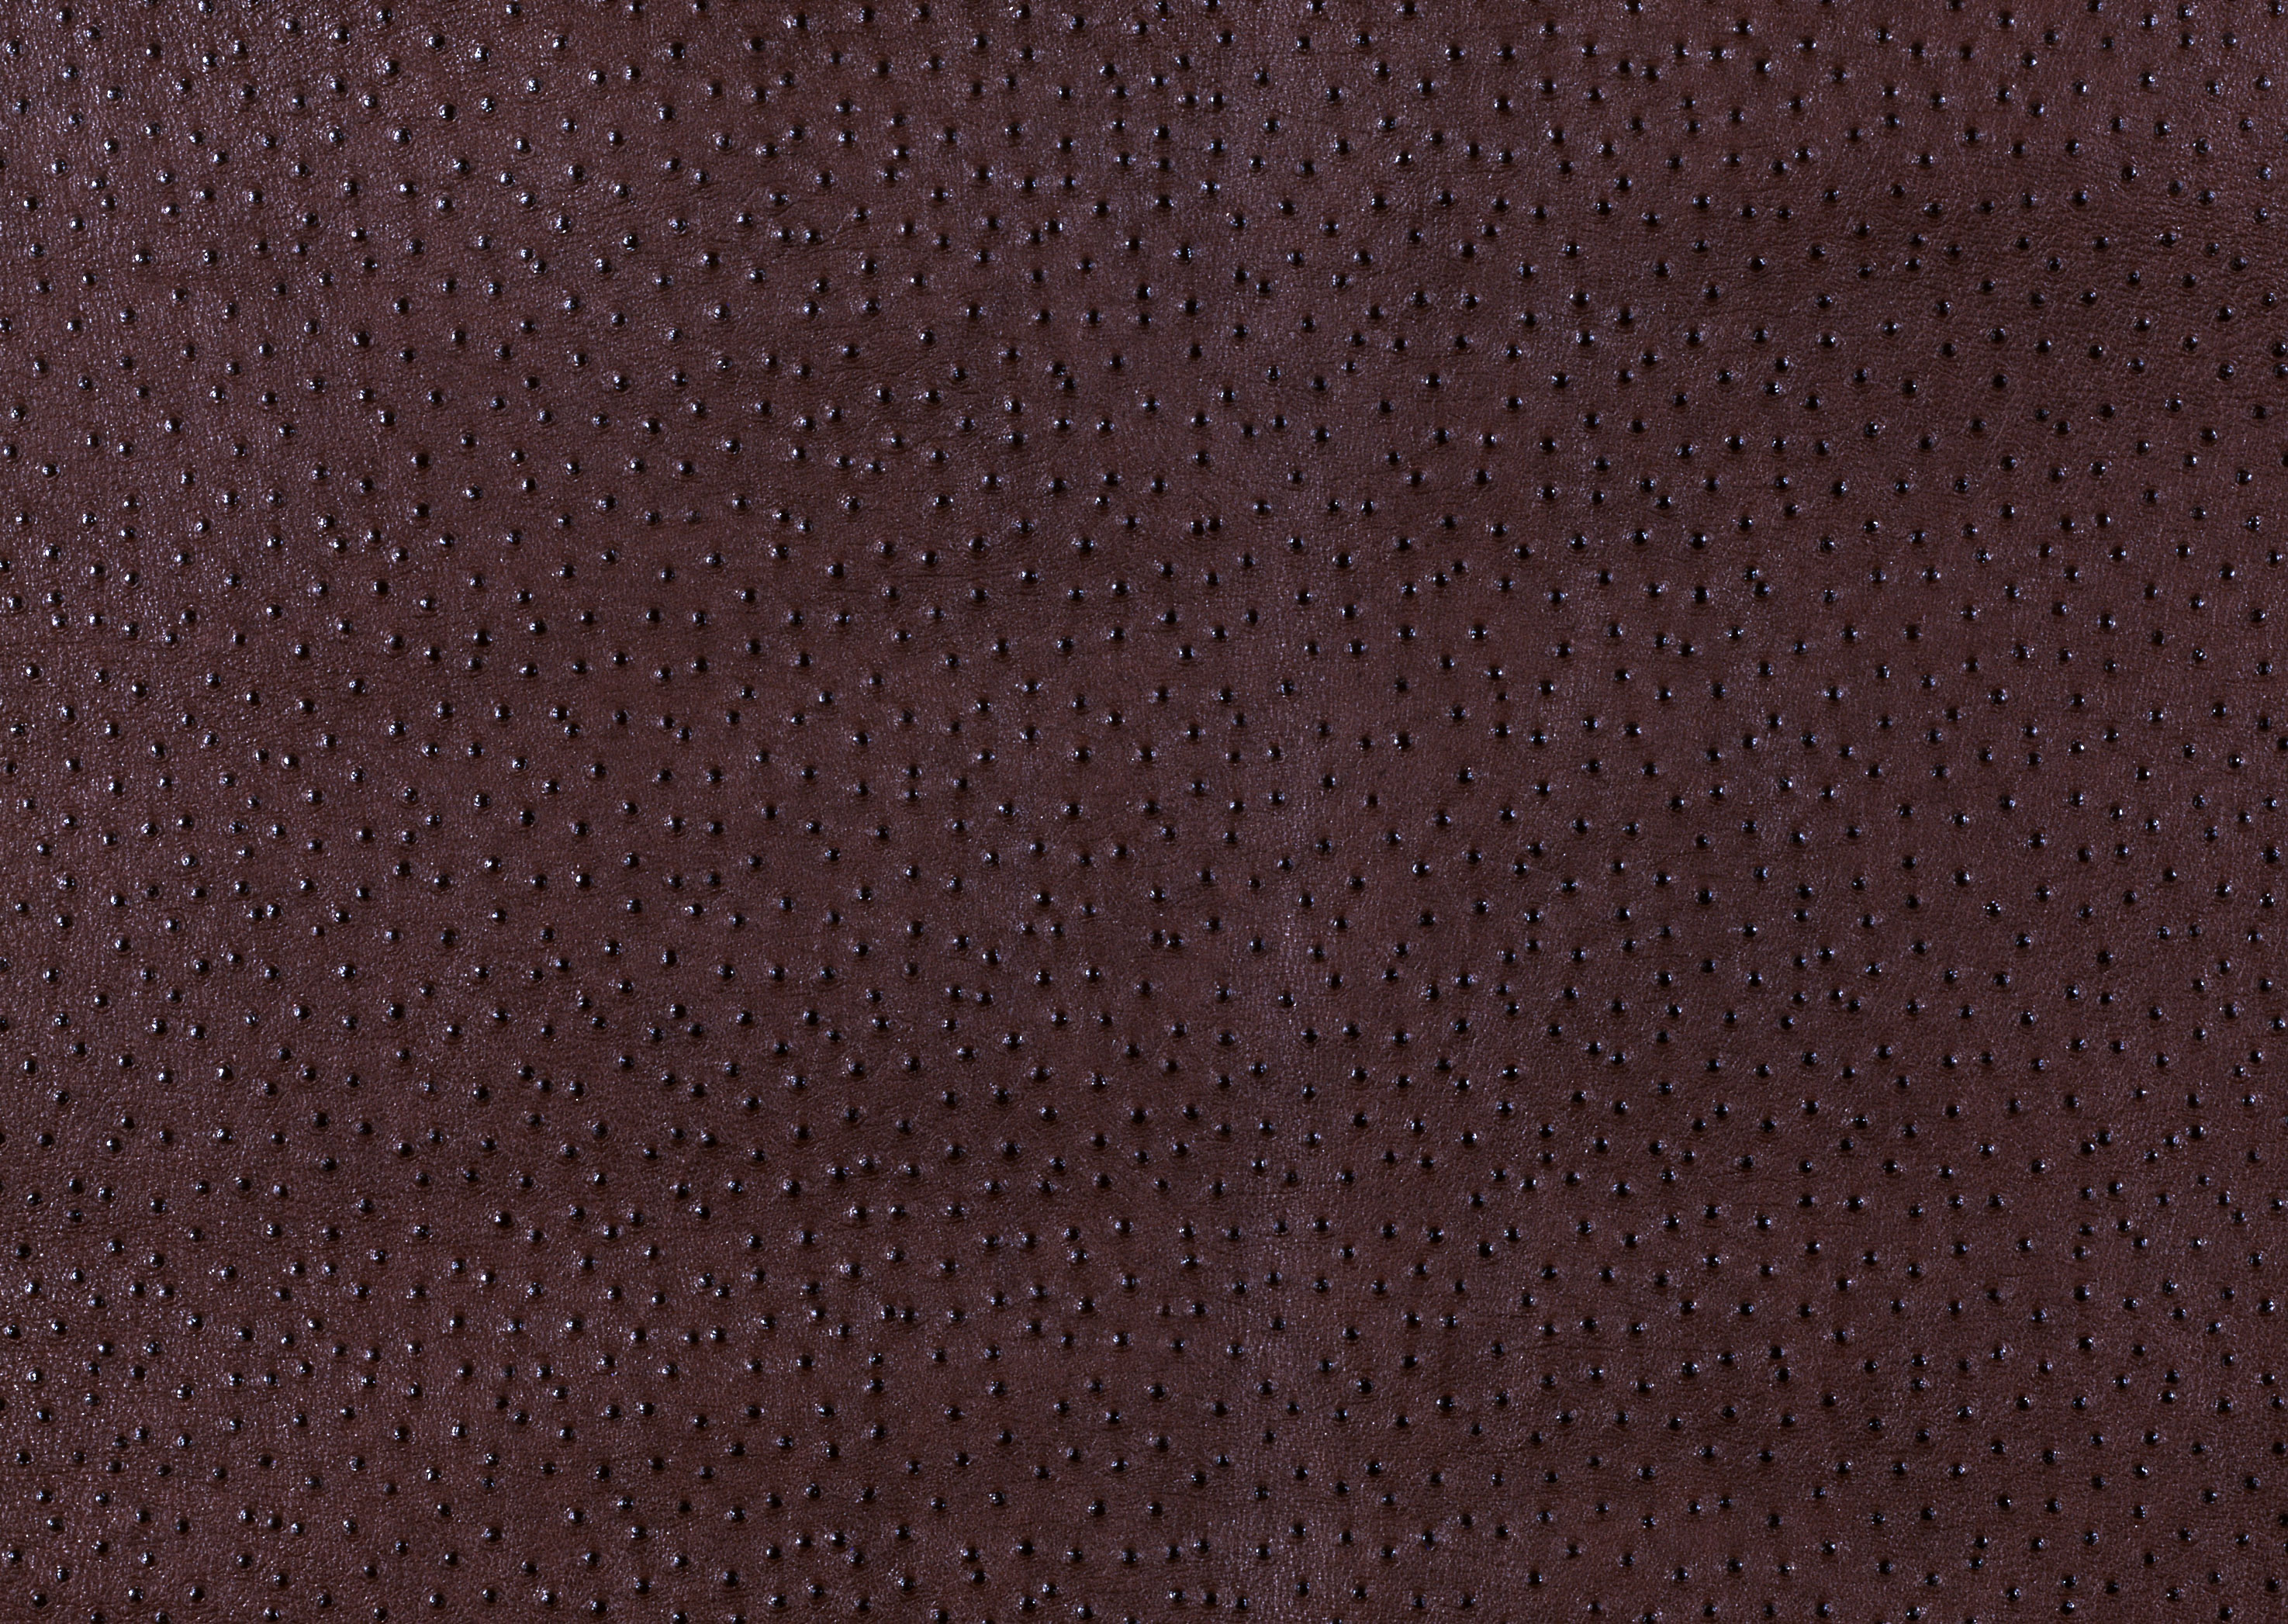 Leather texture background image